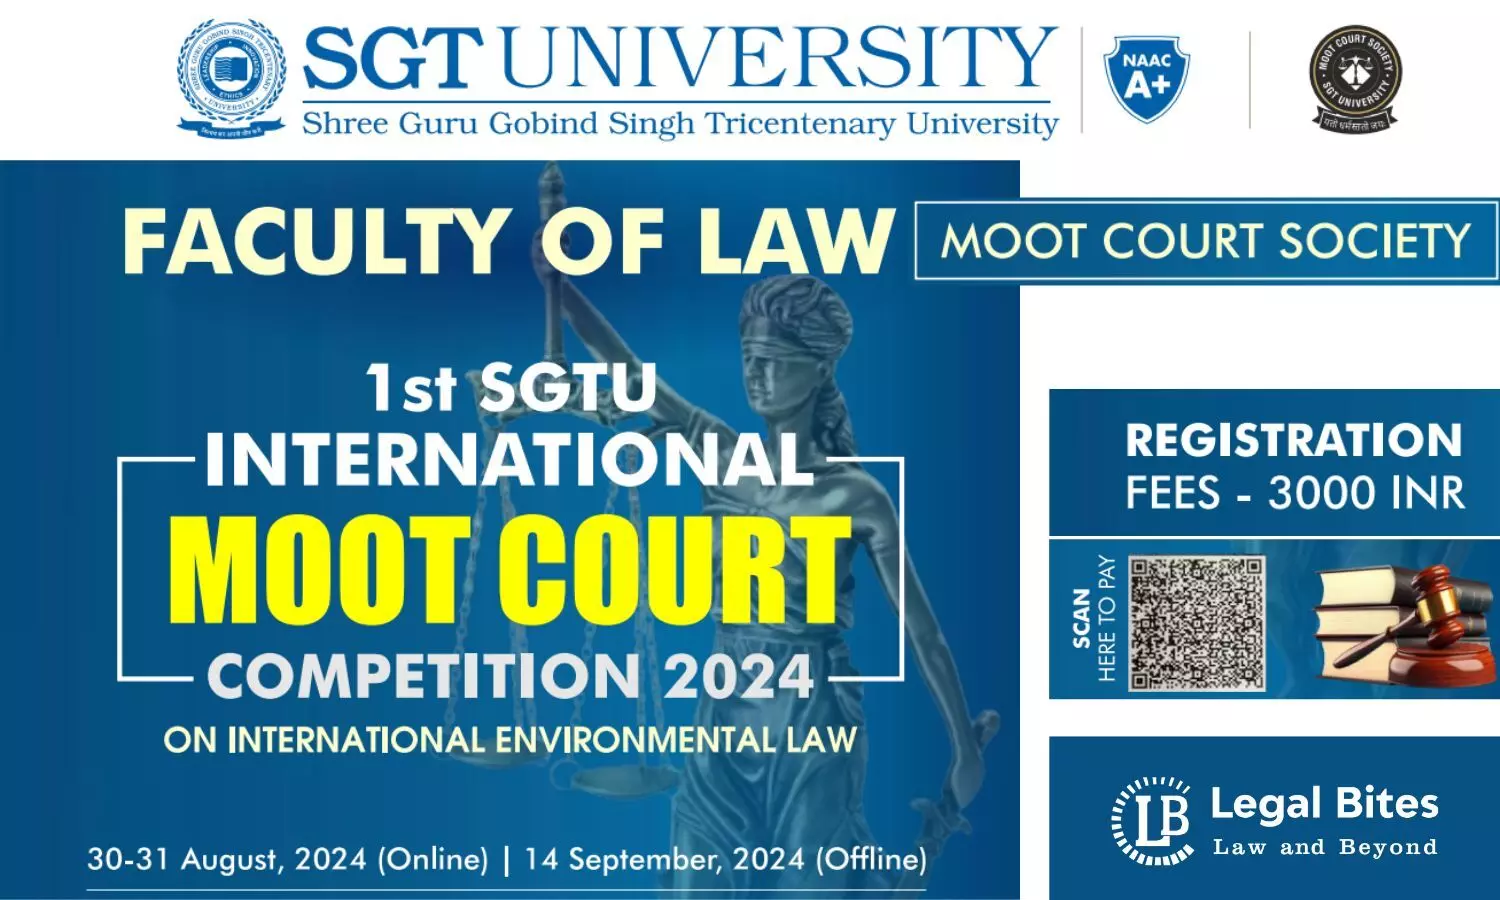 1st SGTU International Moot Court Competition 2024: Register by 20th August 2024 | Faculty of Law at SGT University